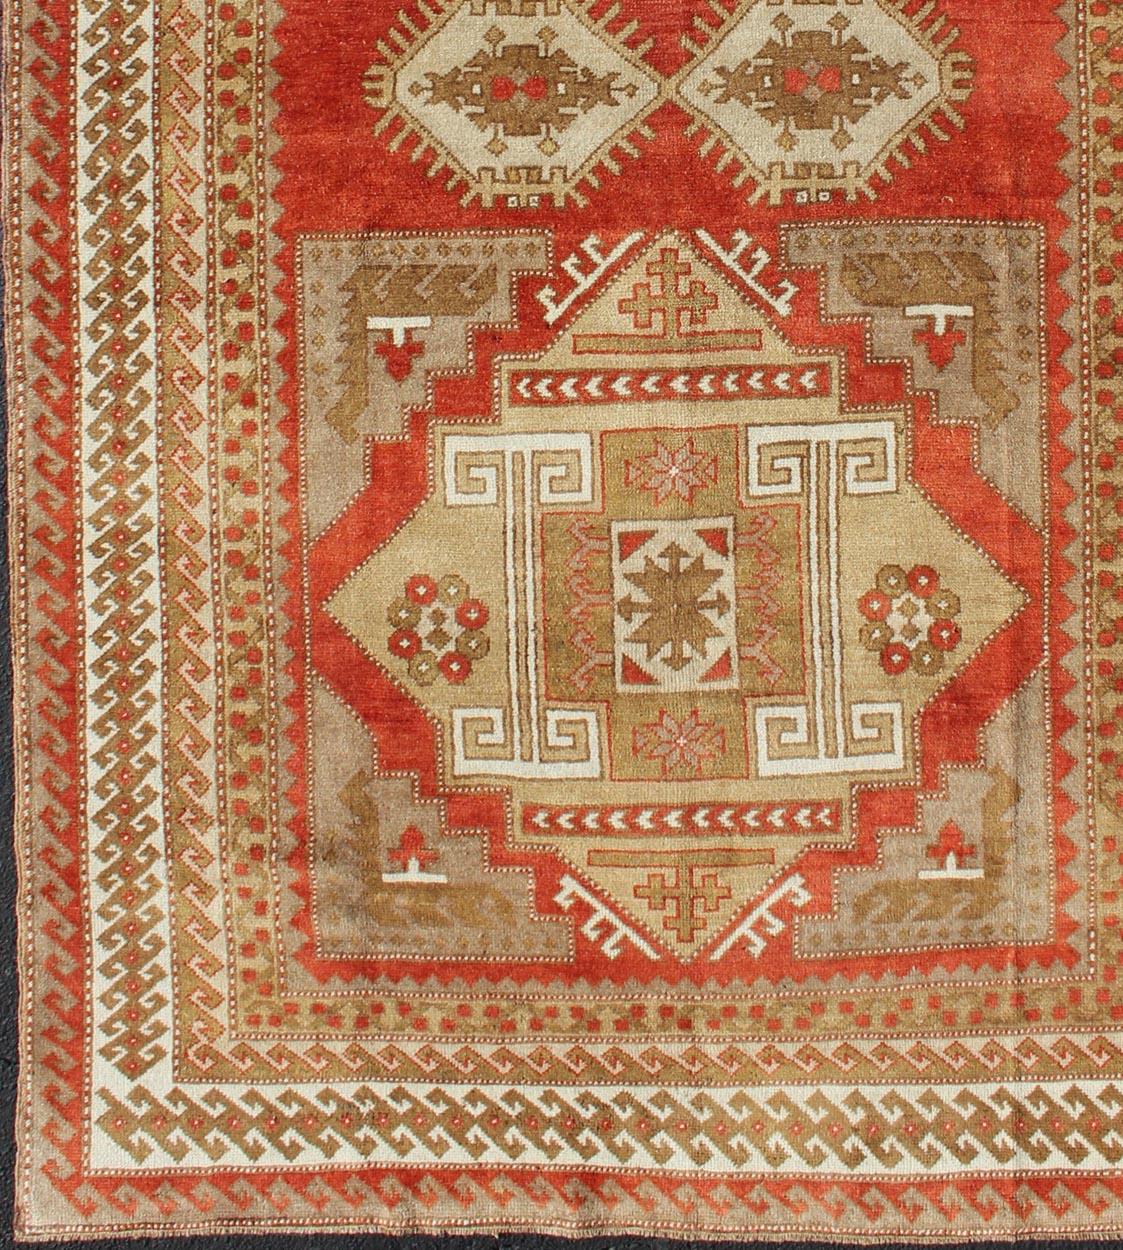 Red tribal medallion design Oushak vintage rug from Turkey, rug tu-mtu-4933, country of origin / type: Turkey / Oushak, circa 1930.

This magnificent vintage Turkish Oushak displays a glorious coloration paired with a beautiful and vibrant tribal